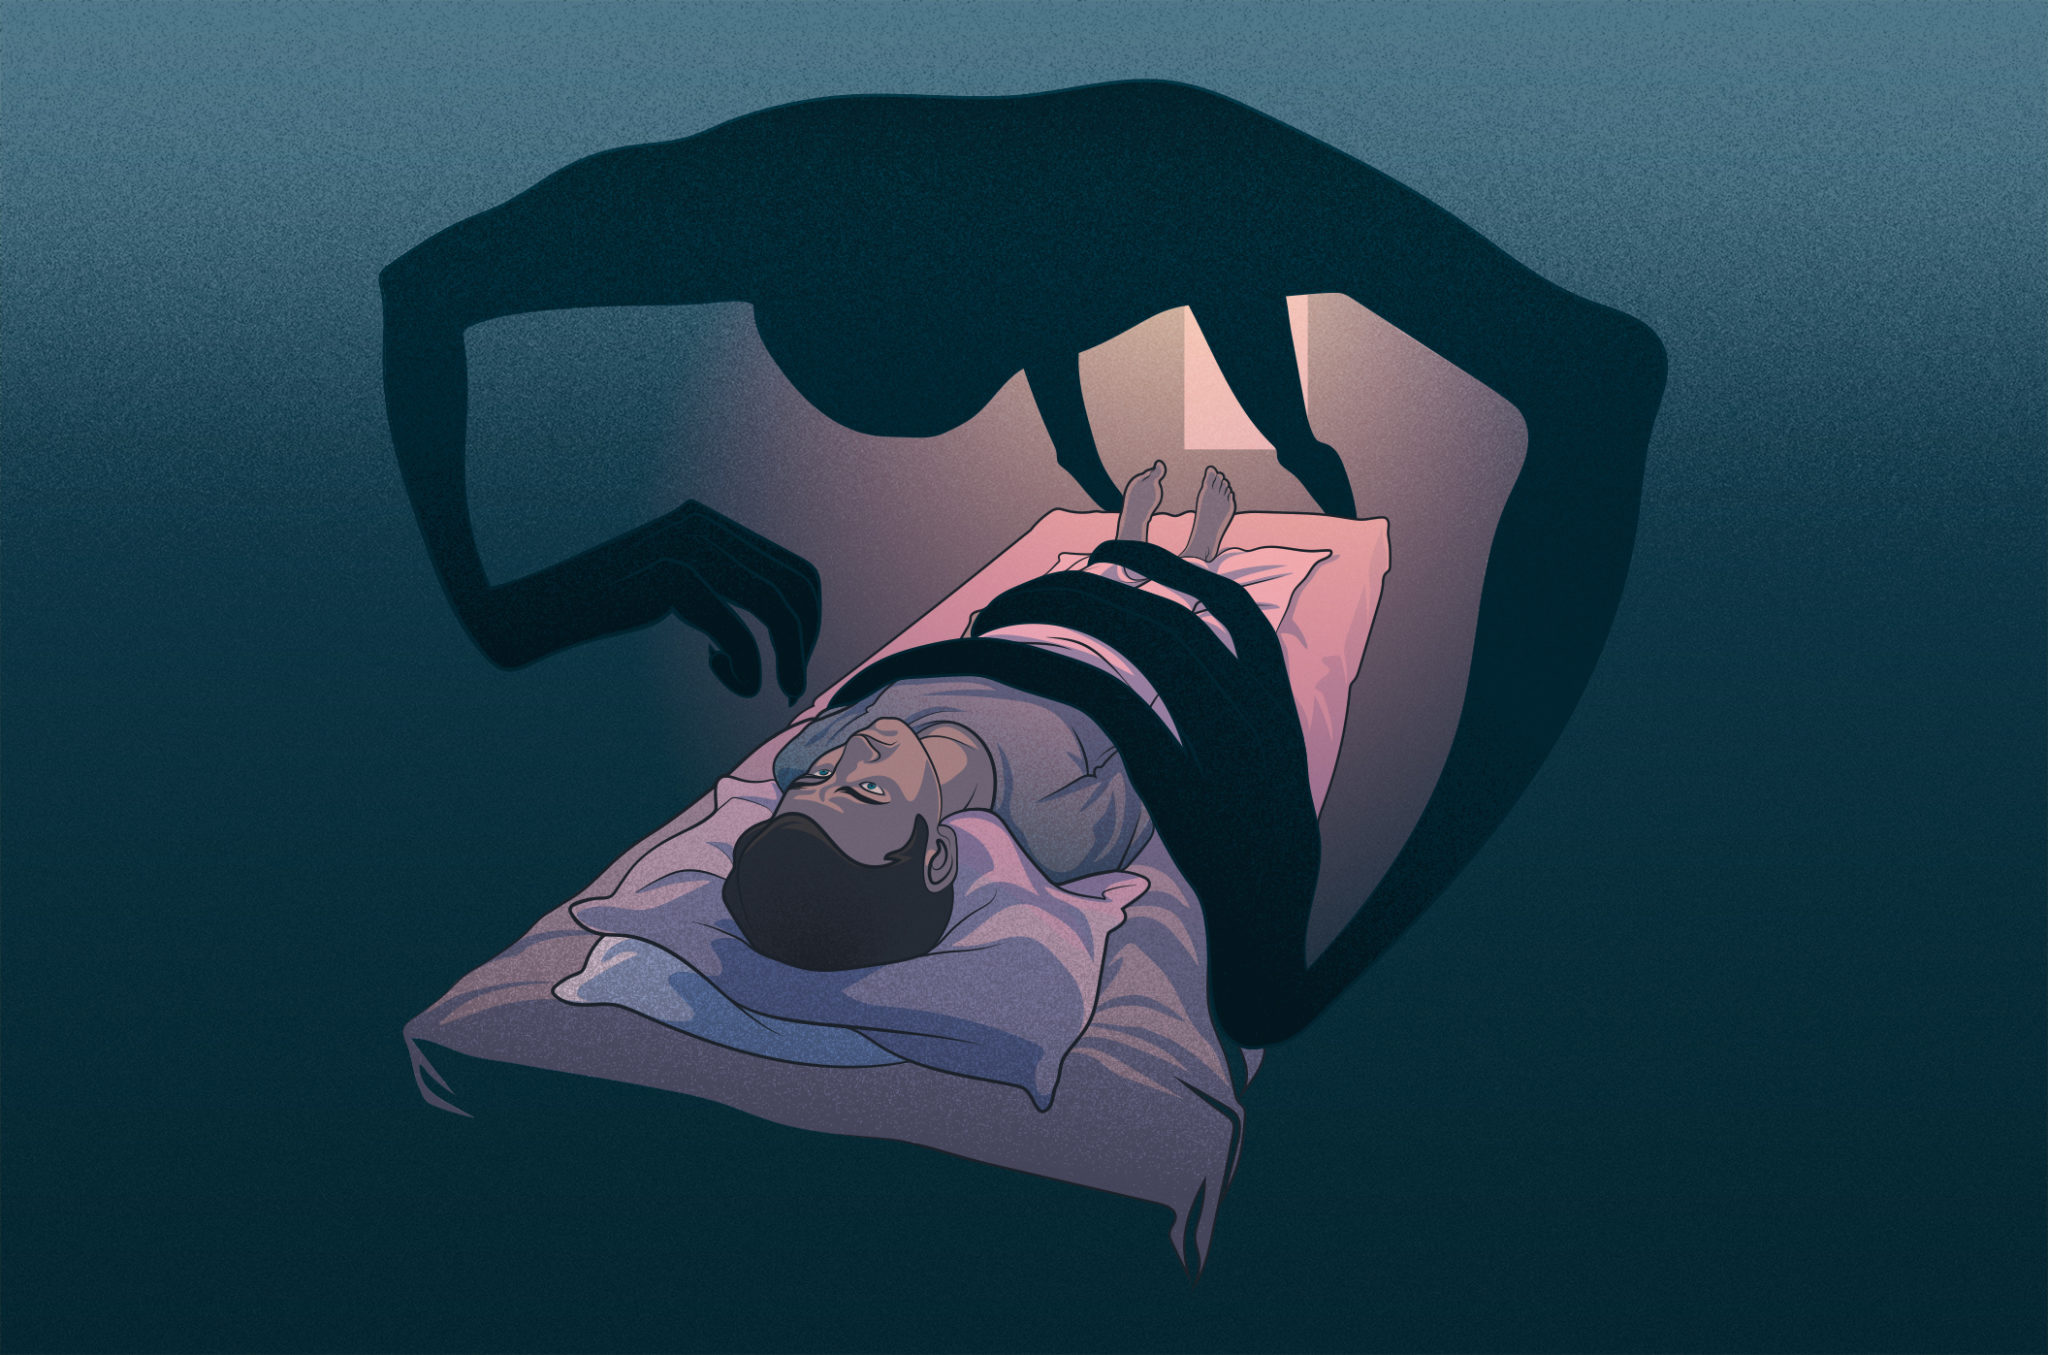 View of a man sleeping in bed while scary thing is holding him.